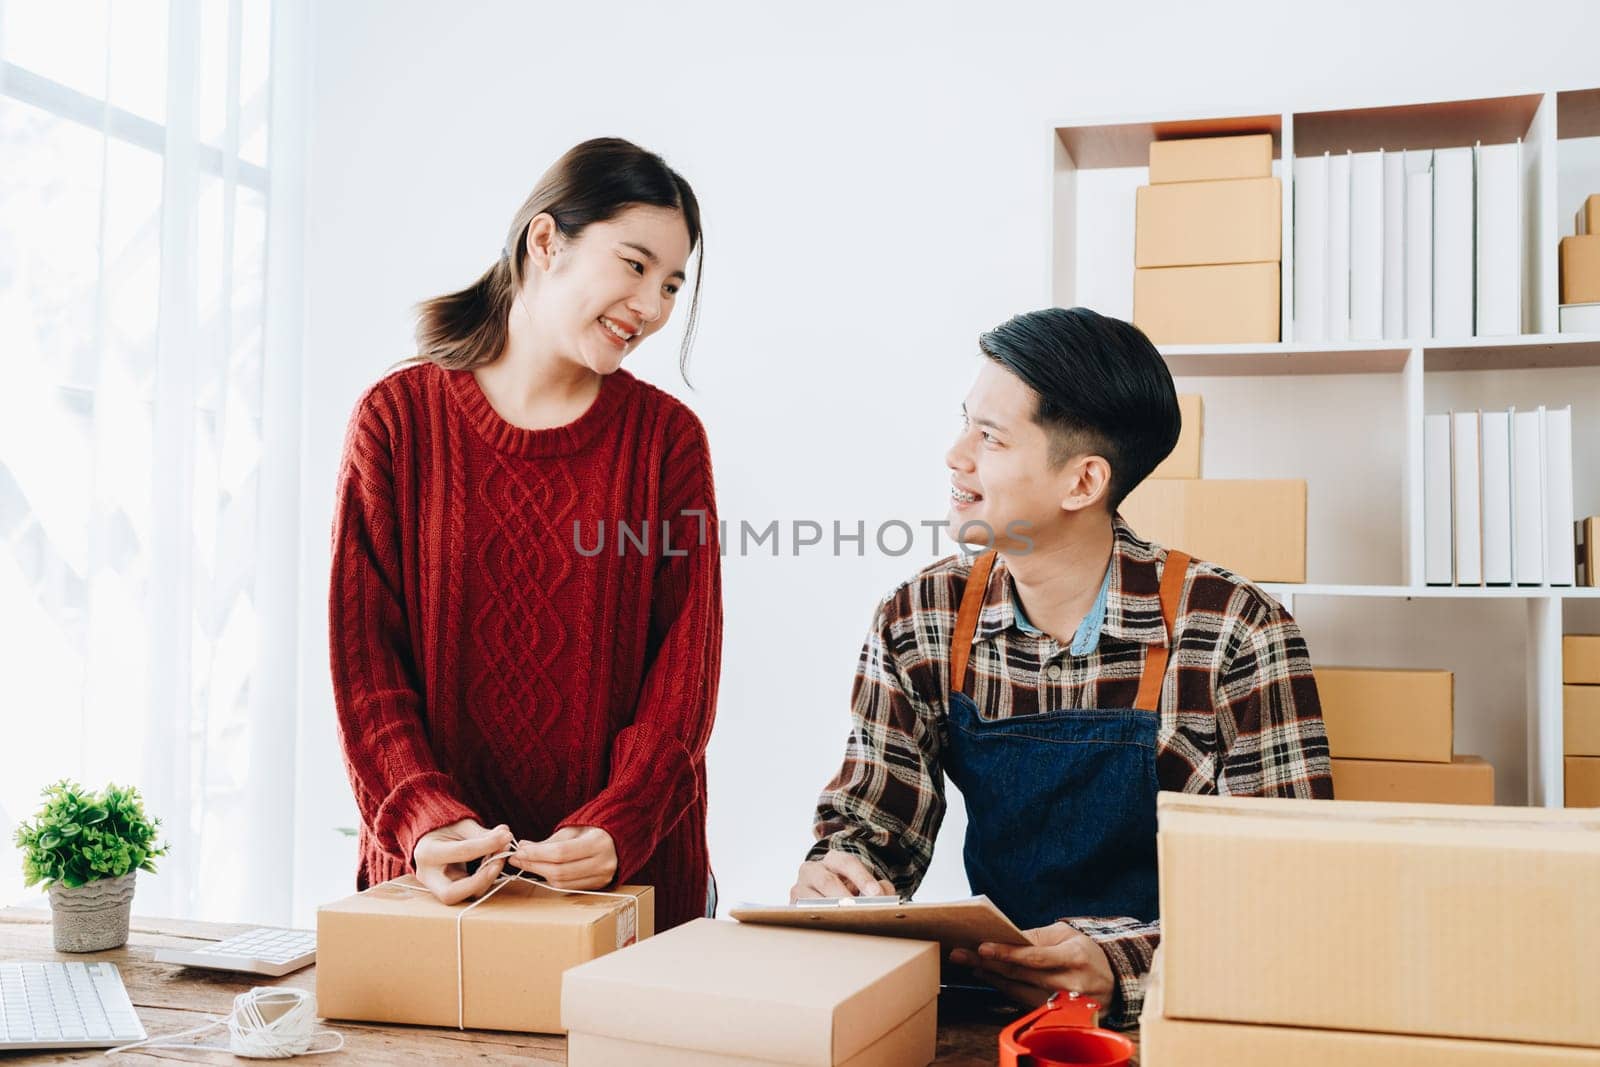 Portrait of Starting small businesses SME owners, family business check online orders Selling products working with boxes freelance work at home office, sme business online small medium enterprise by Manastrong